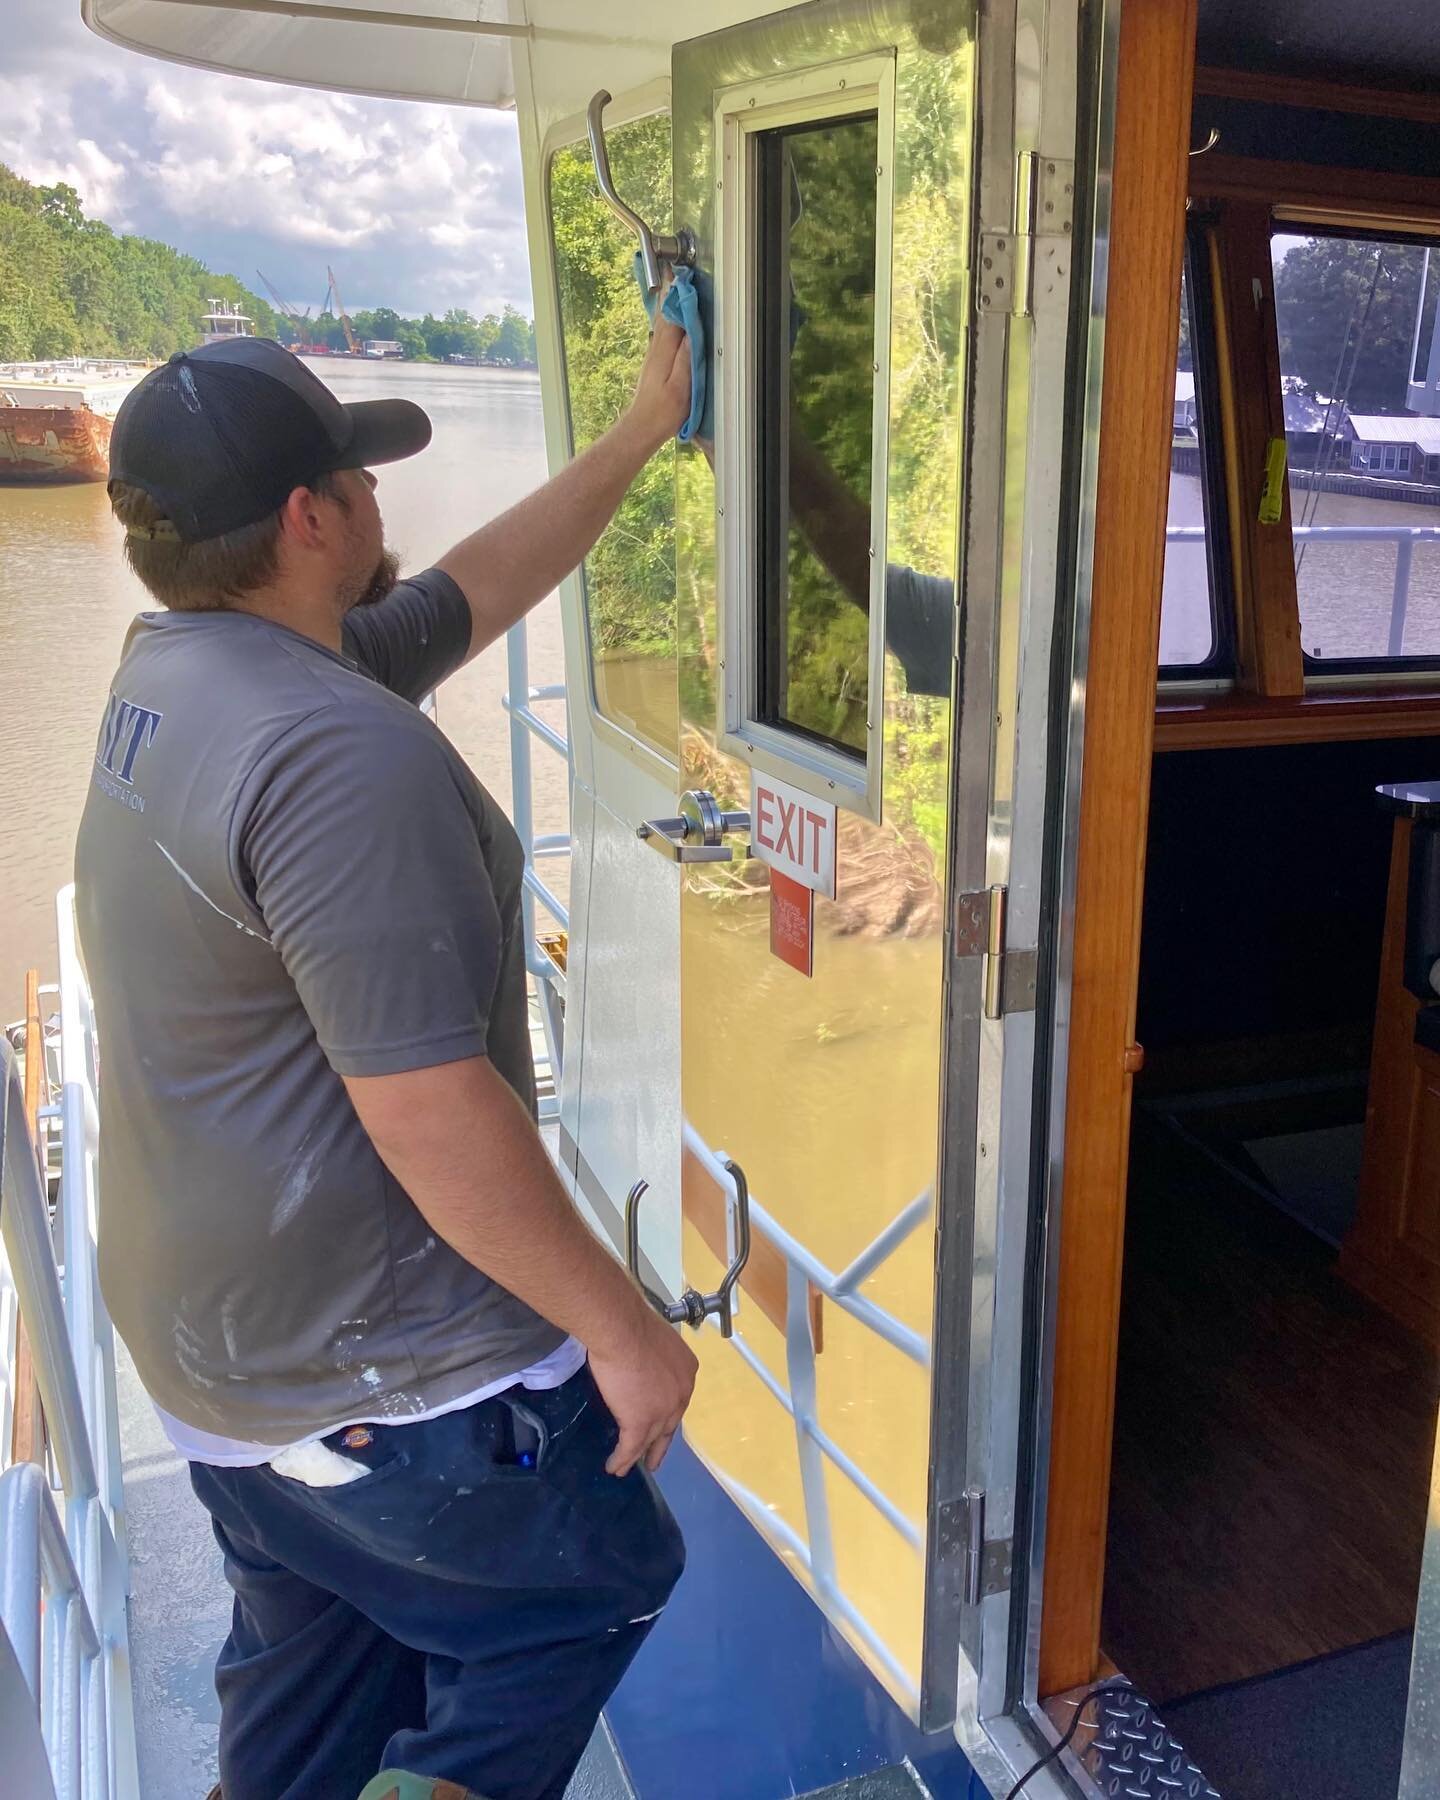 Jeremy Scholz getting that mirror finish on the M/V Jerry Porche doors keeping their vessel looking beautiful ✨✨✨
Thanks Captain Jade O&rsquo;Neal for sharing!
🤩⛴⚓️🤩
.
.
.
#mvjerryporche #prideinyourride #towboat #pushboat #towboatlife #shiny #mirr